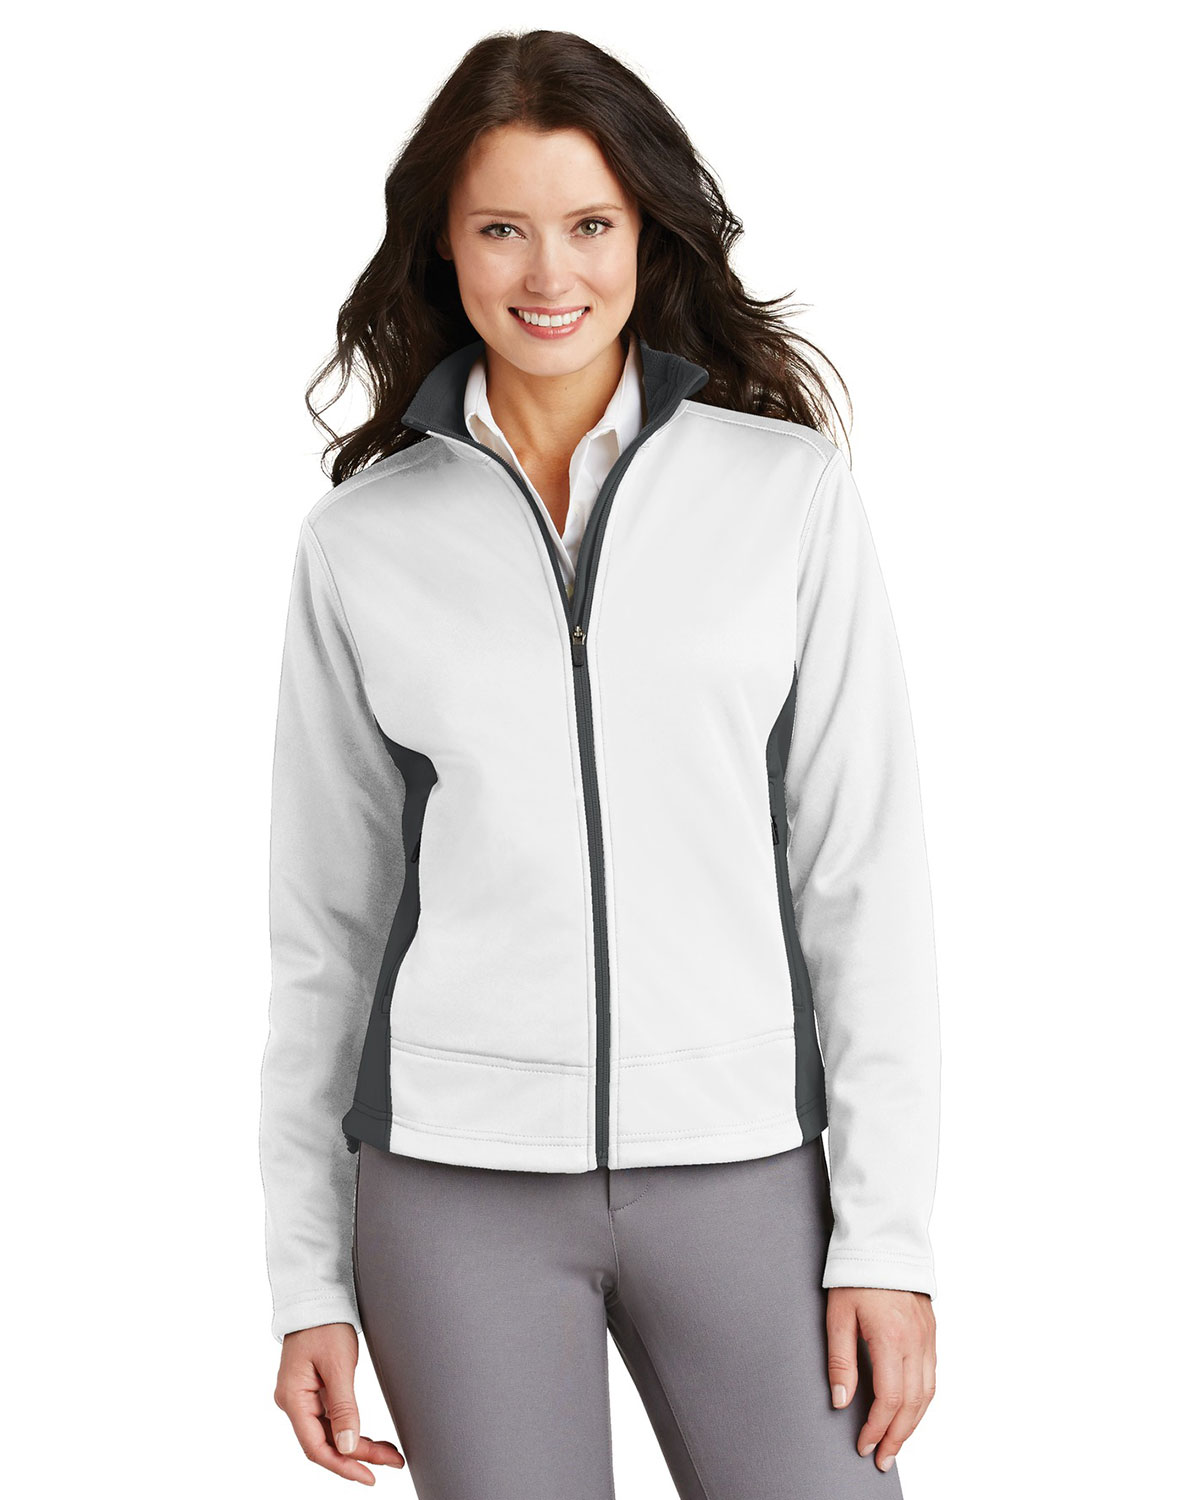 Port Authority L794 Women Twotone Soft Shell Jacket at Apparelstation